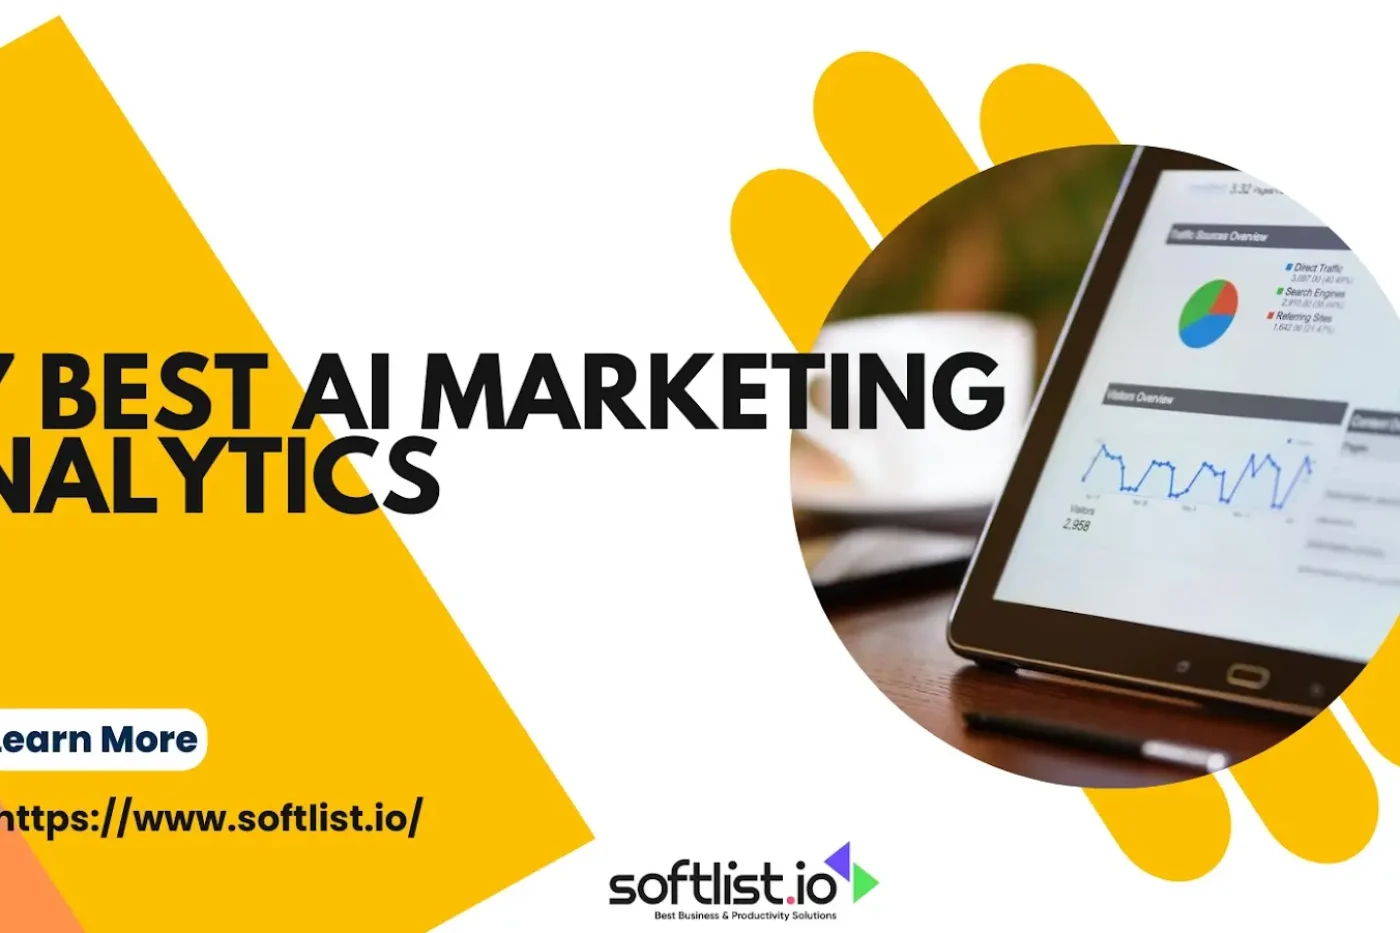 From Data to Strategy: 37 Best AI Marketing Analytics Tools